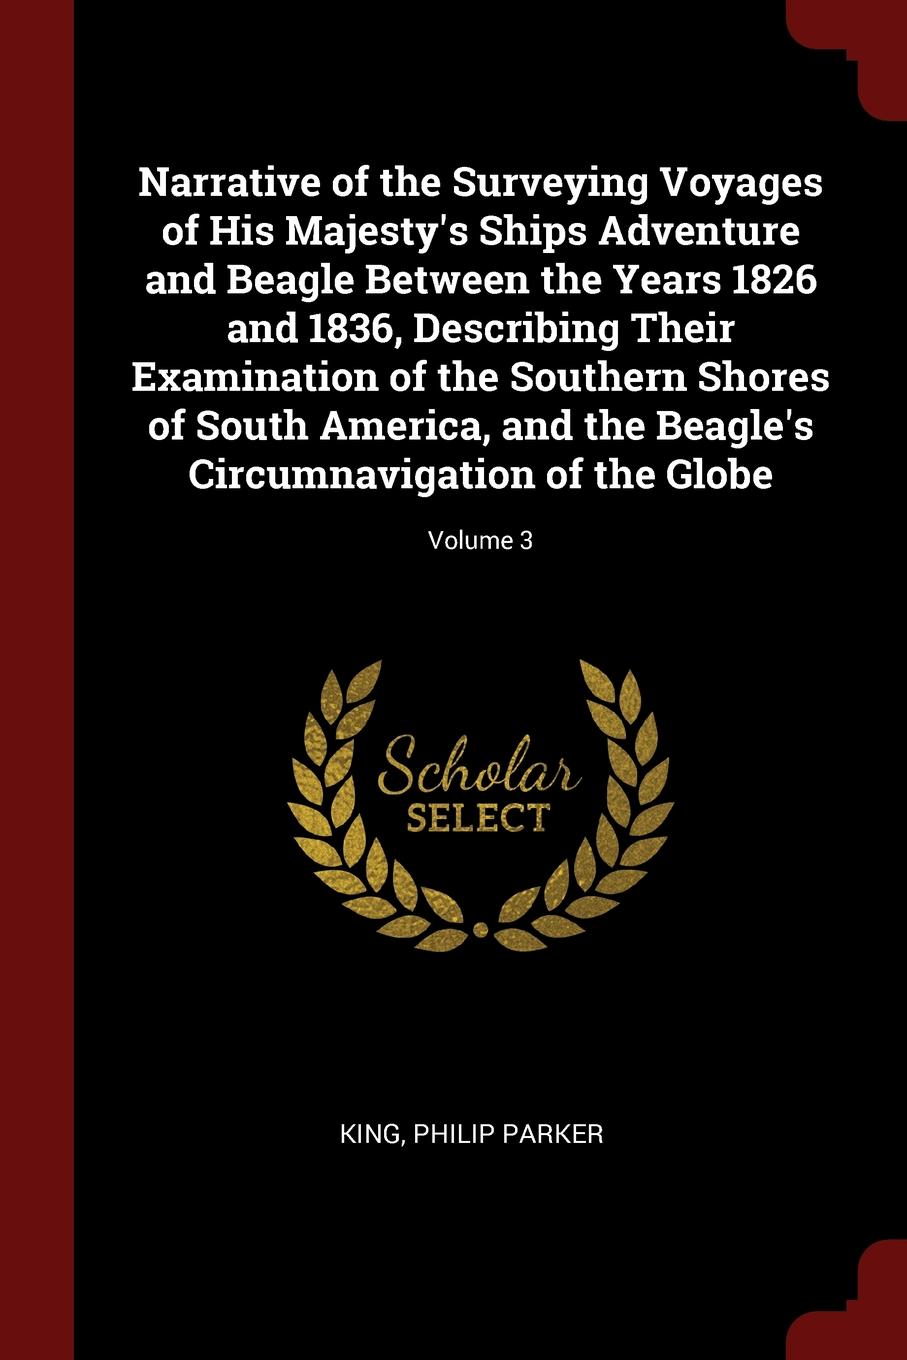 Narrative of the Surveying Voyages of His Majesty.s Ships Adventure and Beagle Between the Years 1826 and 1836, Describing Their Examination of the Southern Shores of South America, and the Beagle.s Circumnavigation of the Globe; Volume 3